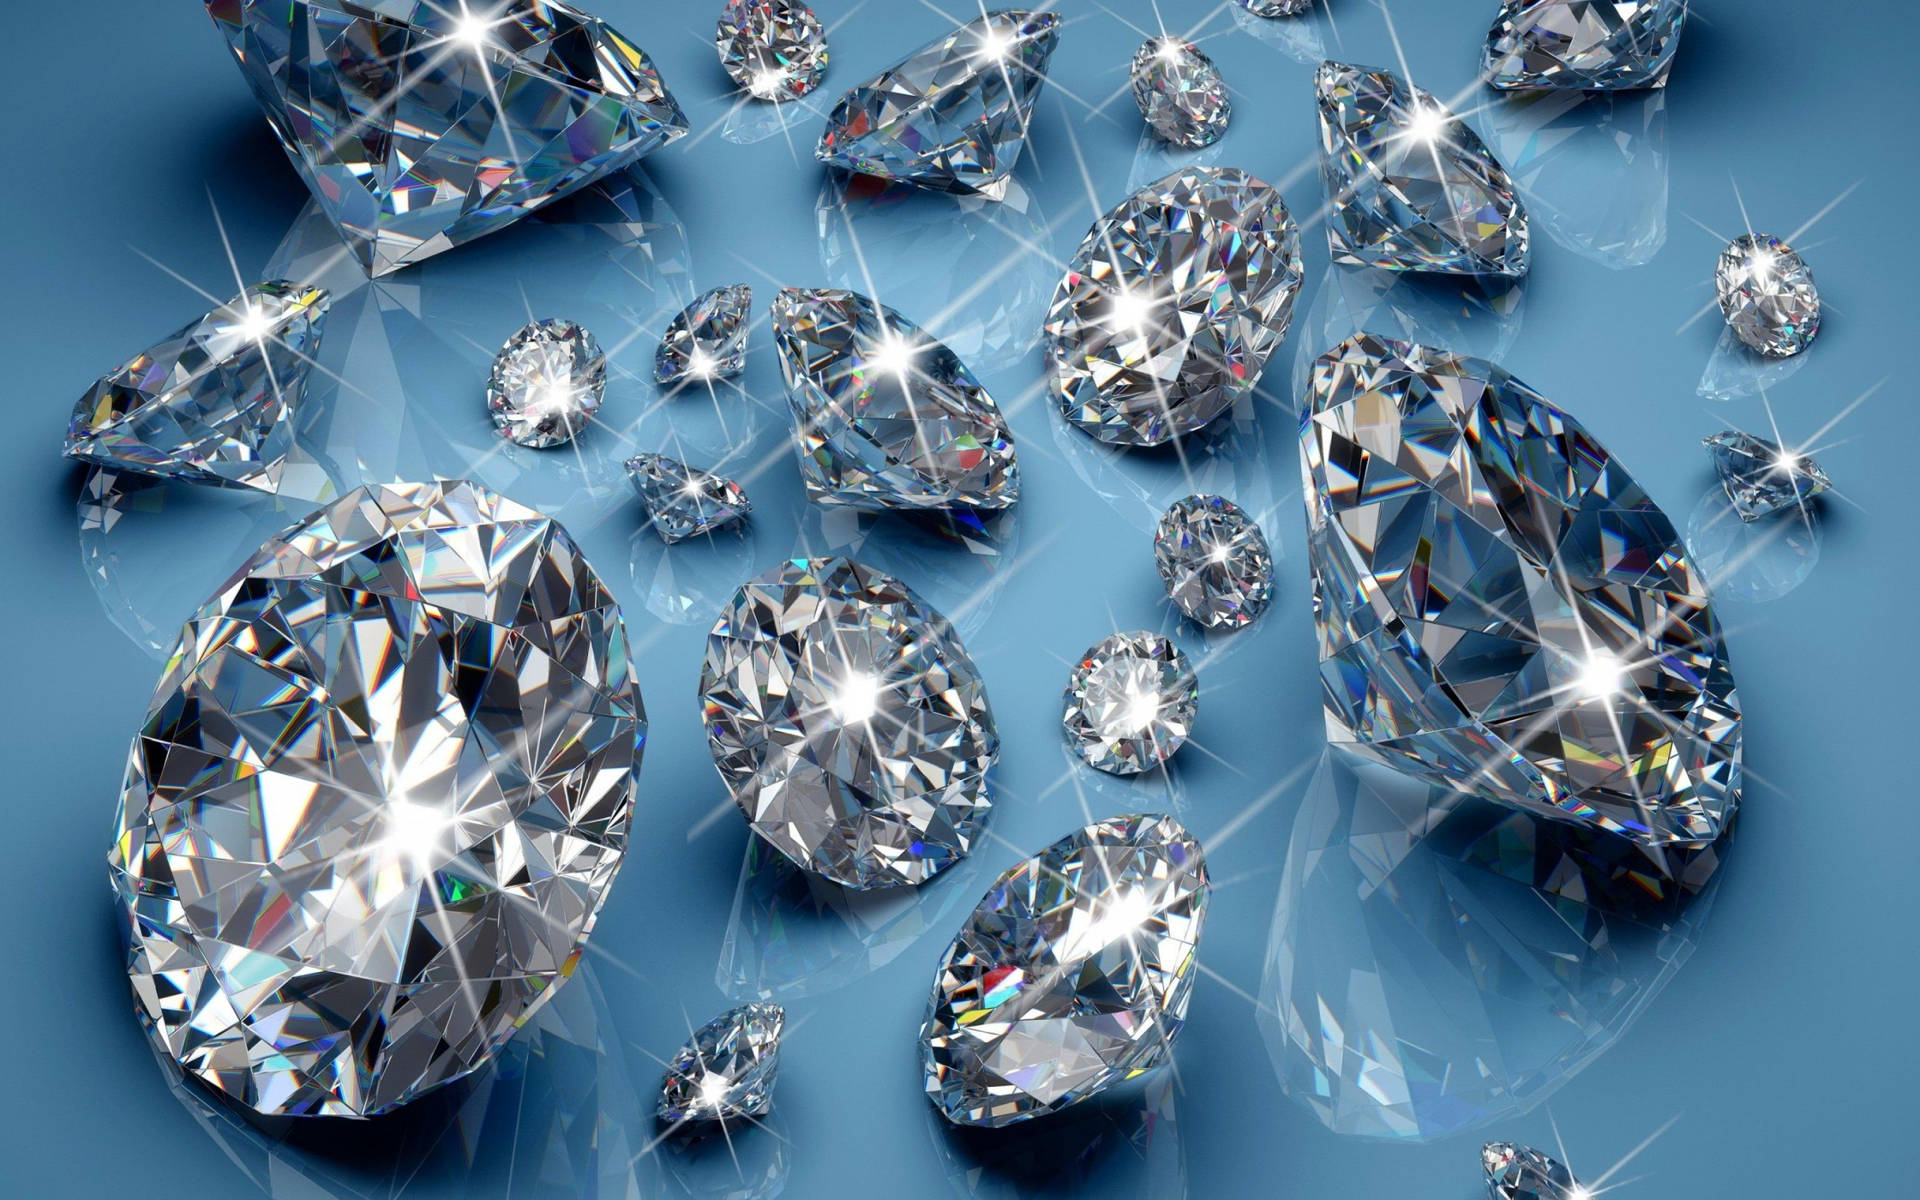 Diamond 3072X1920 Wallpaper and Background Image